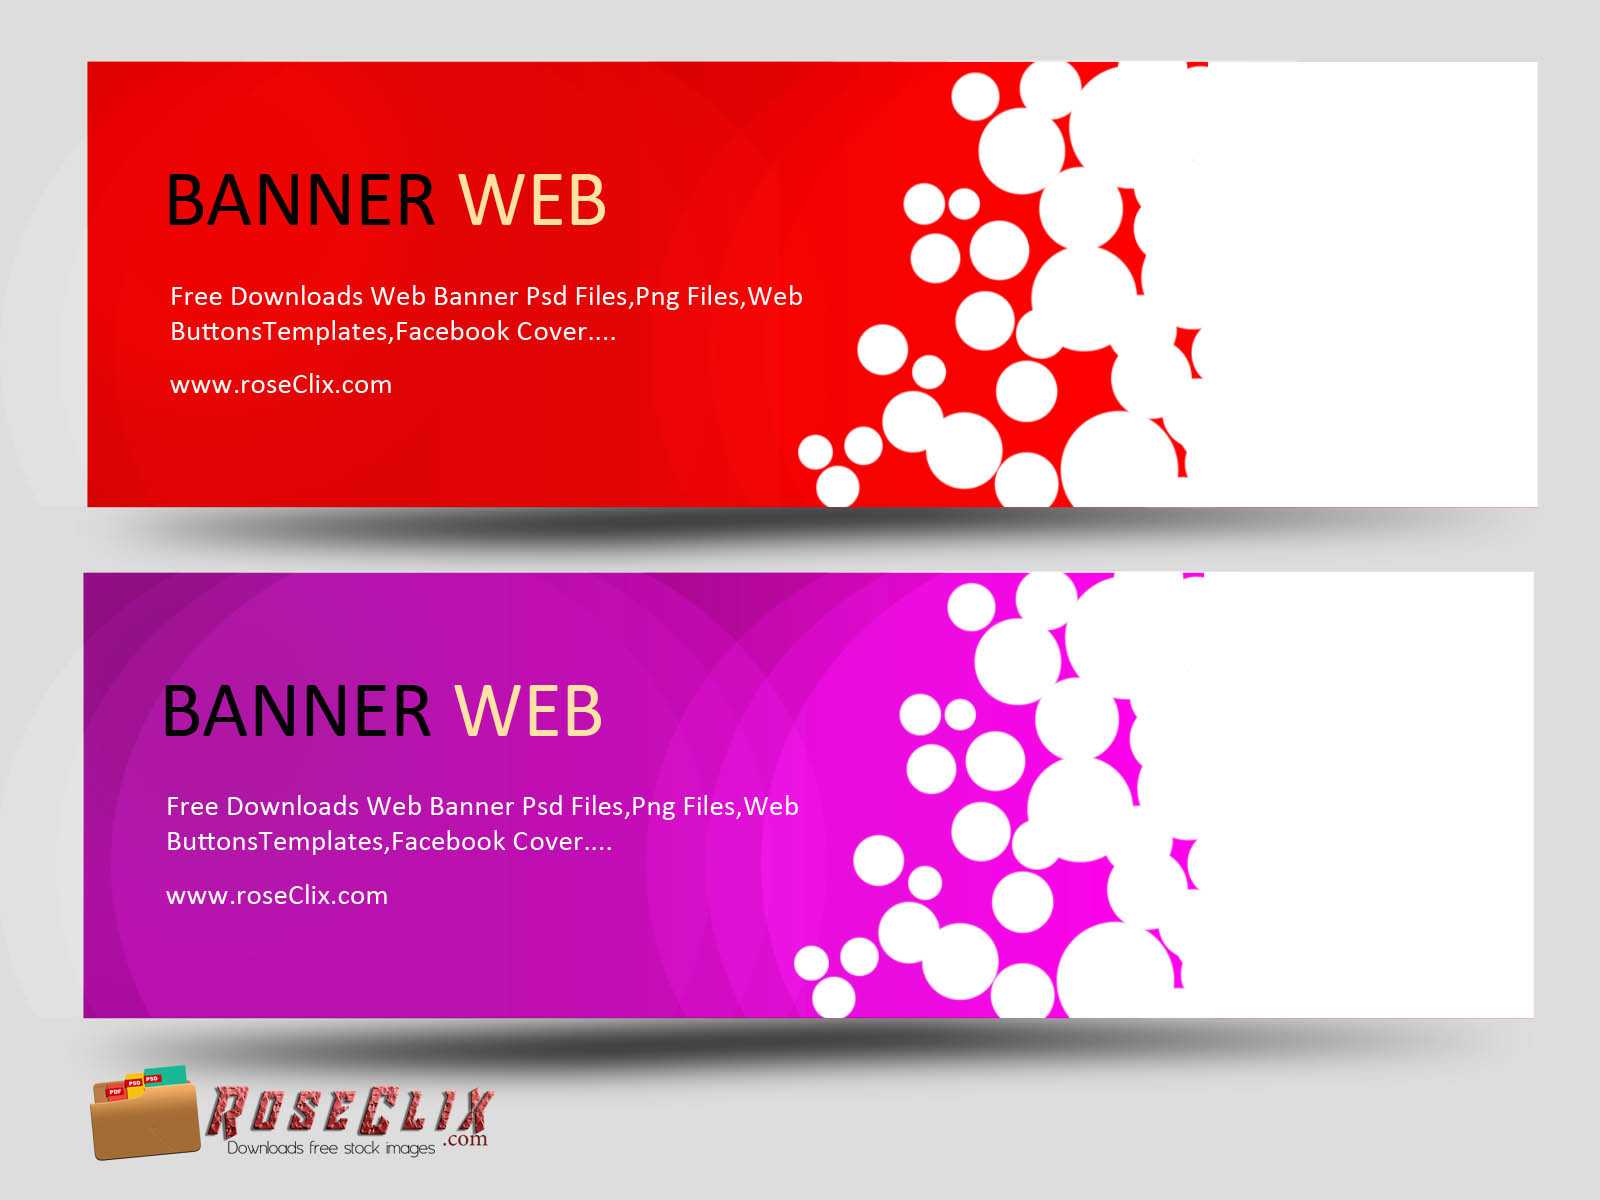 Web Design Banner Images Free Download - Yeppe With Regard To Website Banner Templates Free Download